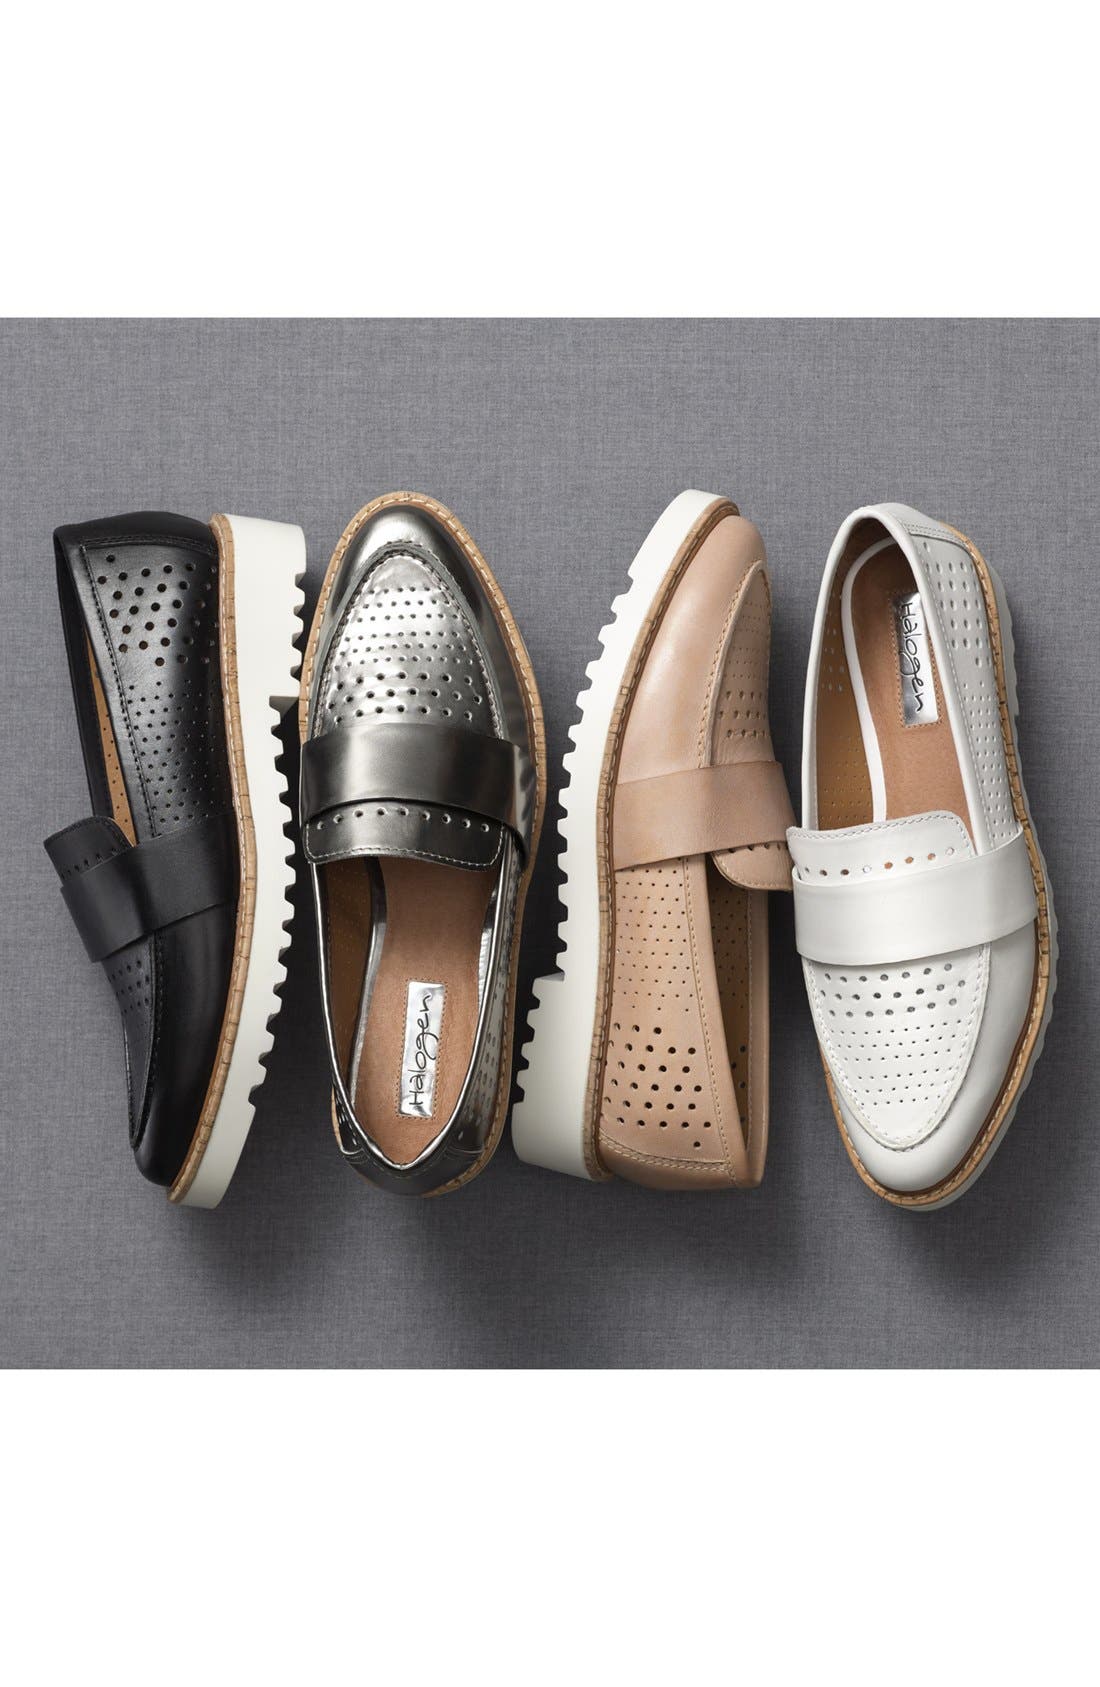 halogen shoes loafers